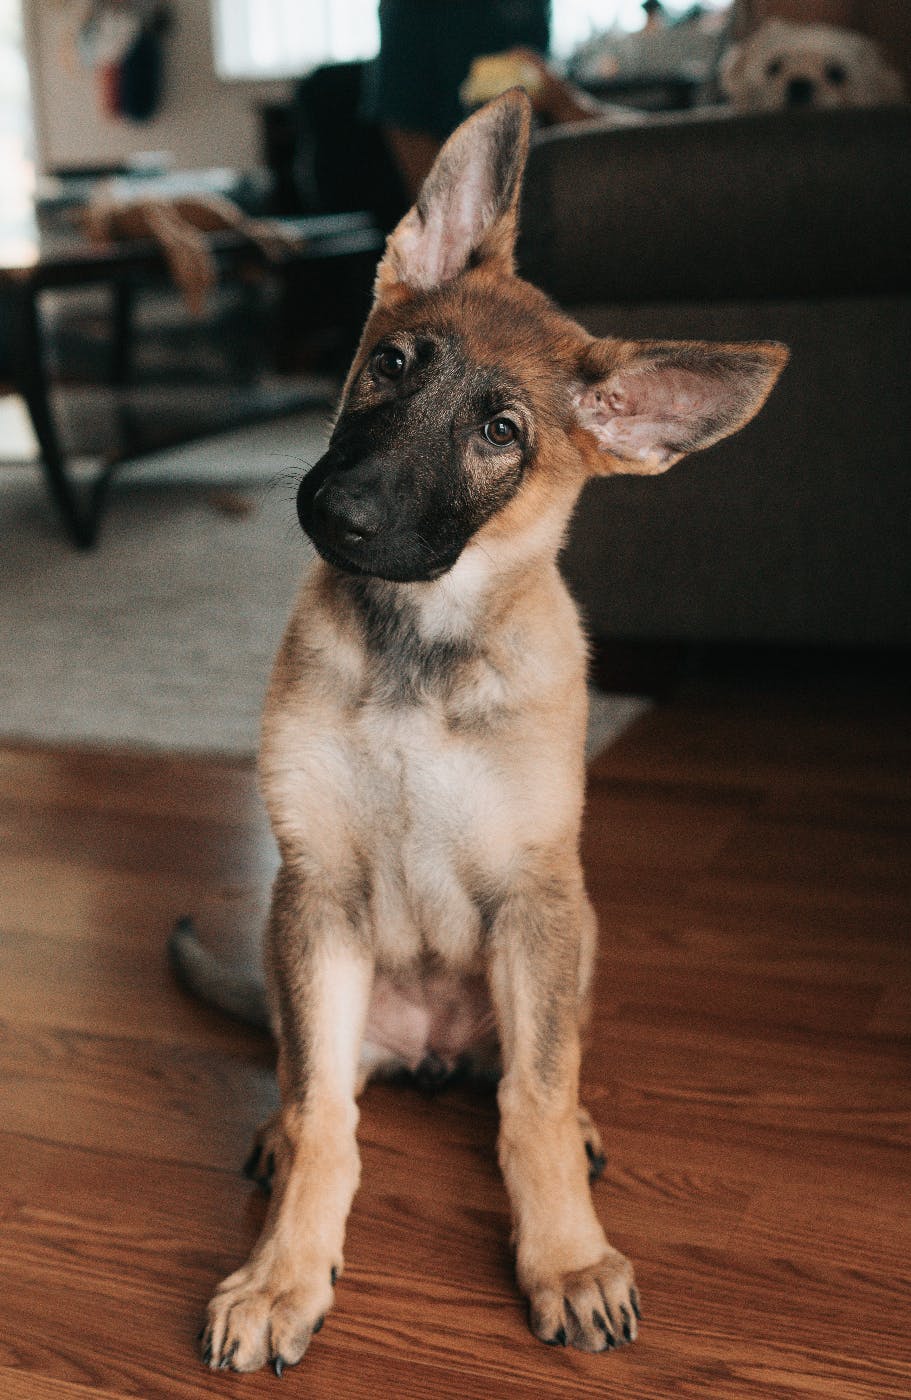 A German Sheperd puppy with large ears